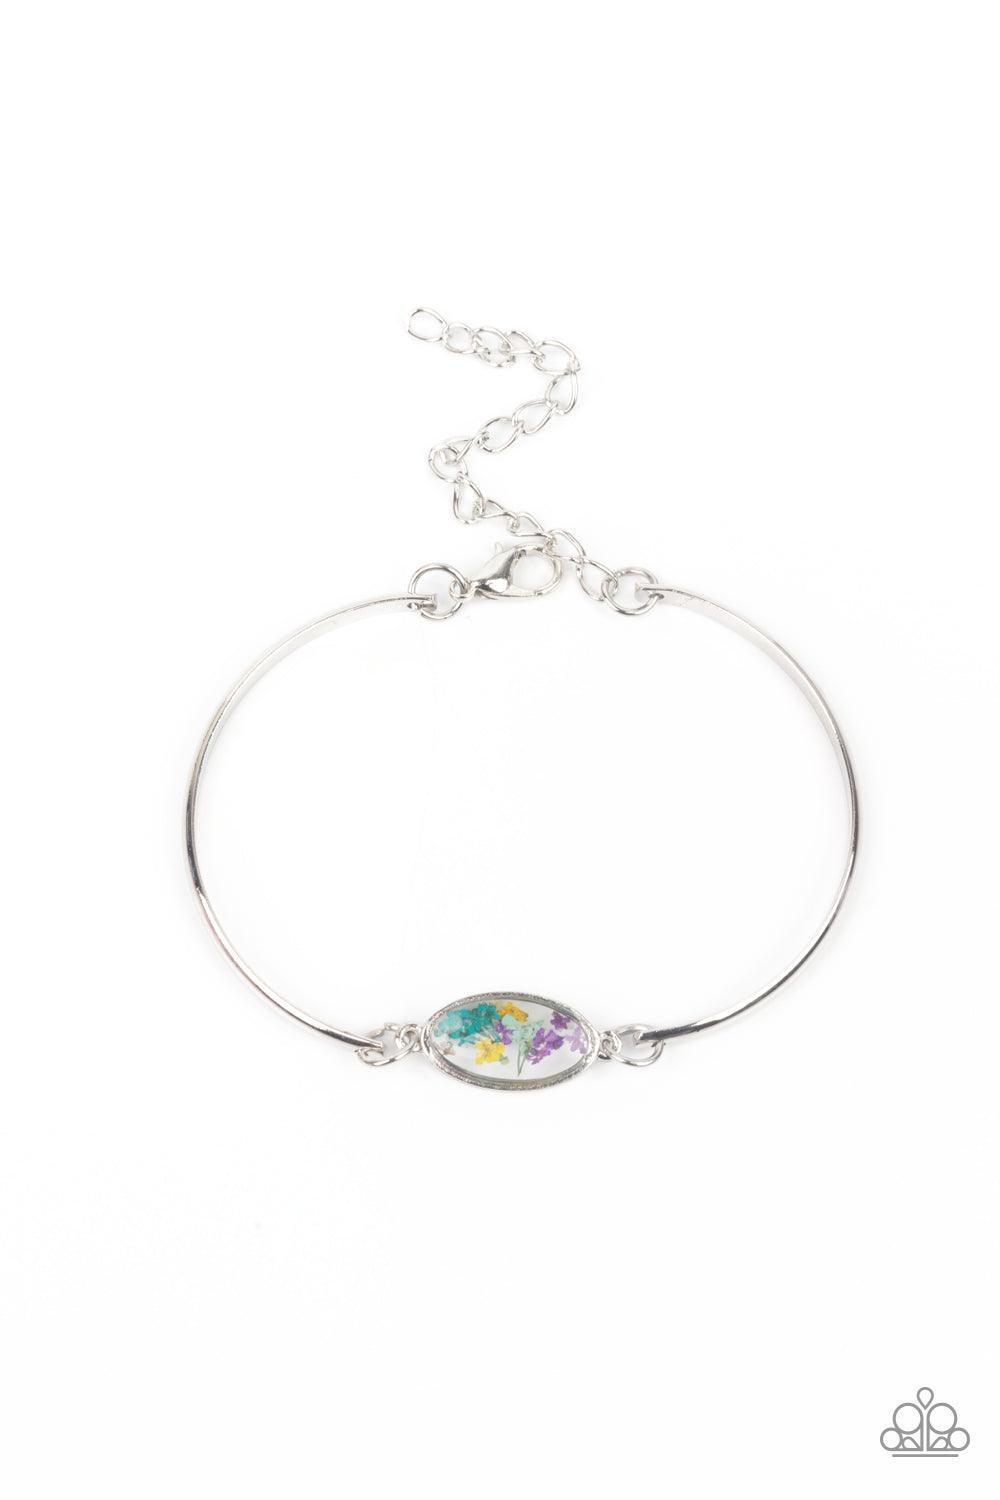 Paparazzi Accessories Farmhouse Fairytale - Multi A collection of colorful wildflowers is encased in a glassy casing bordered in silver that attaches to two shiny silver bars around the wrist, creating a whimsically dainty centerpiece. Features an adjusta